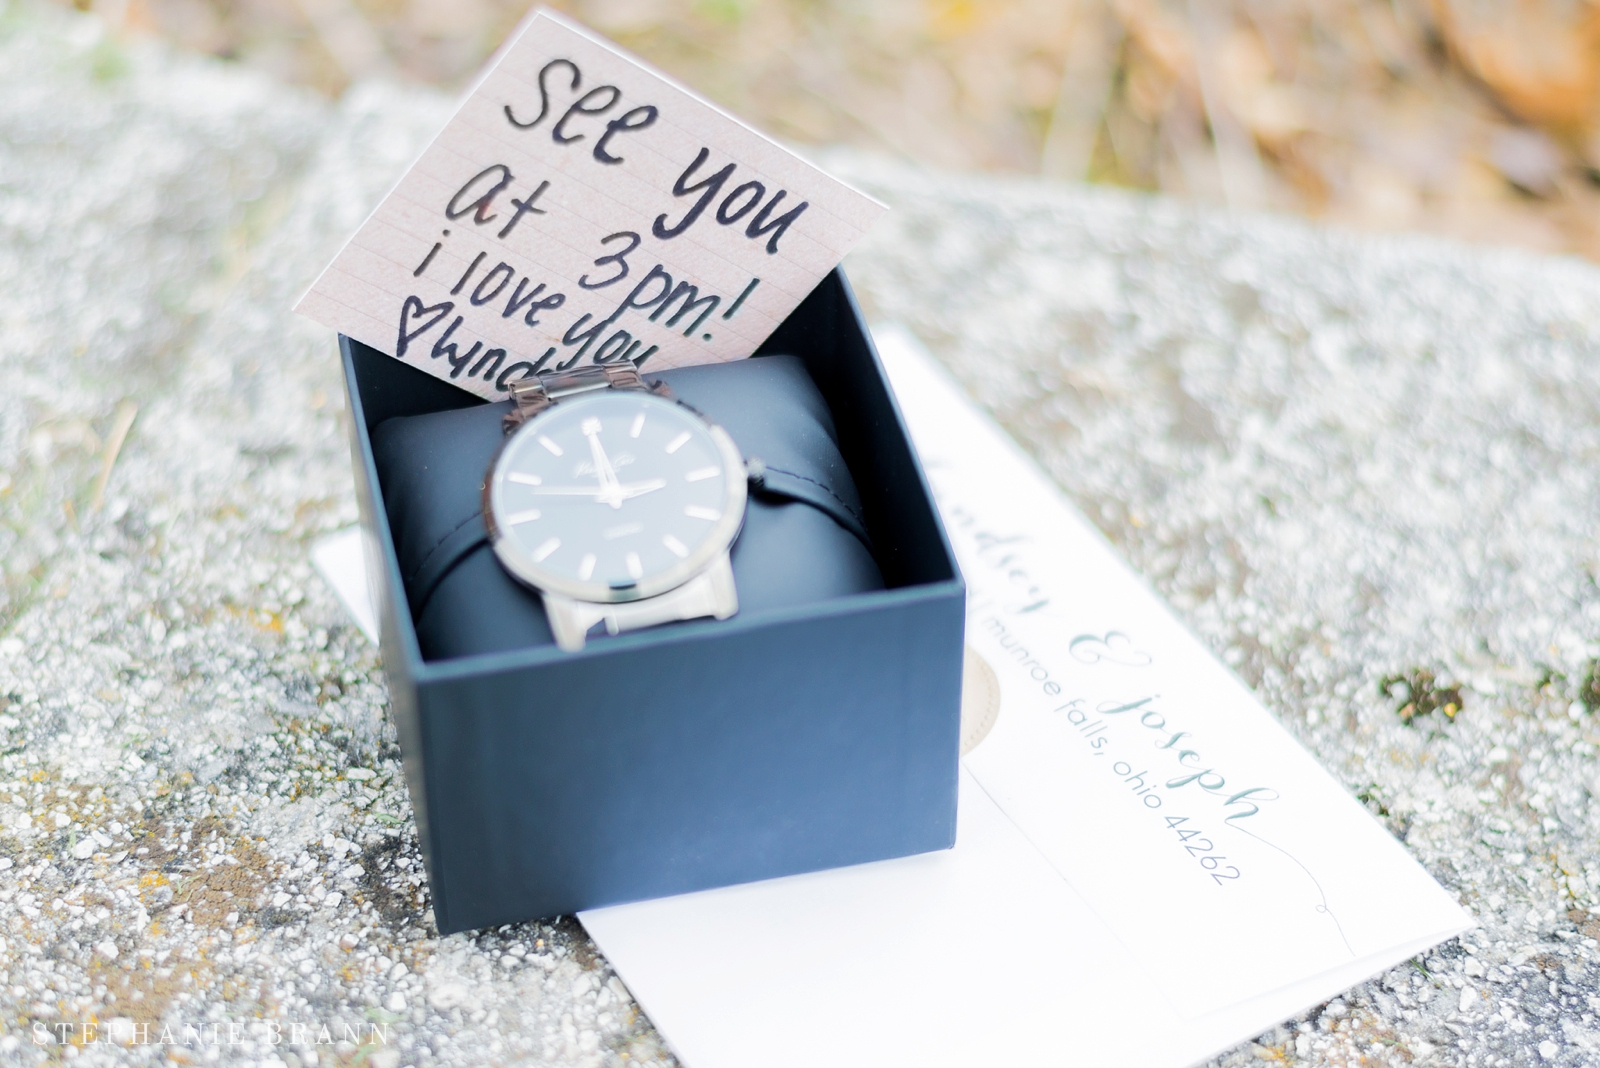 wedding watch gift from a bride to her groom before the ceremony